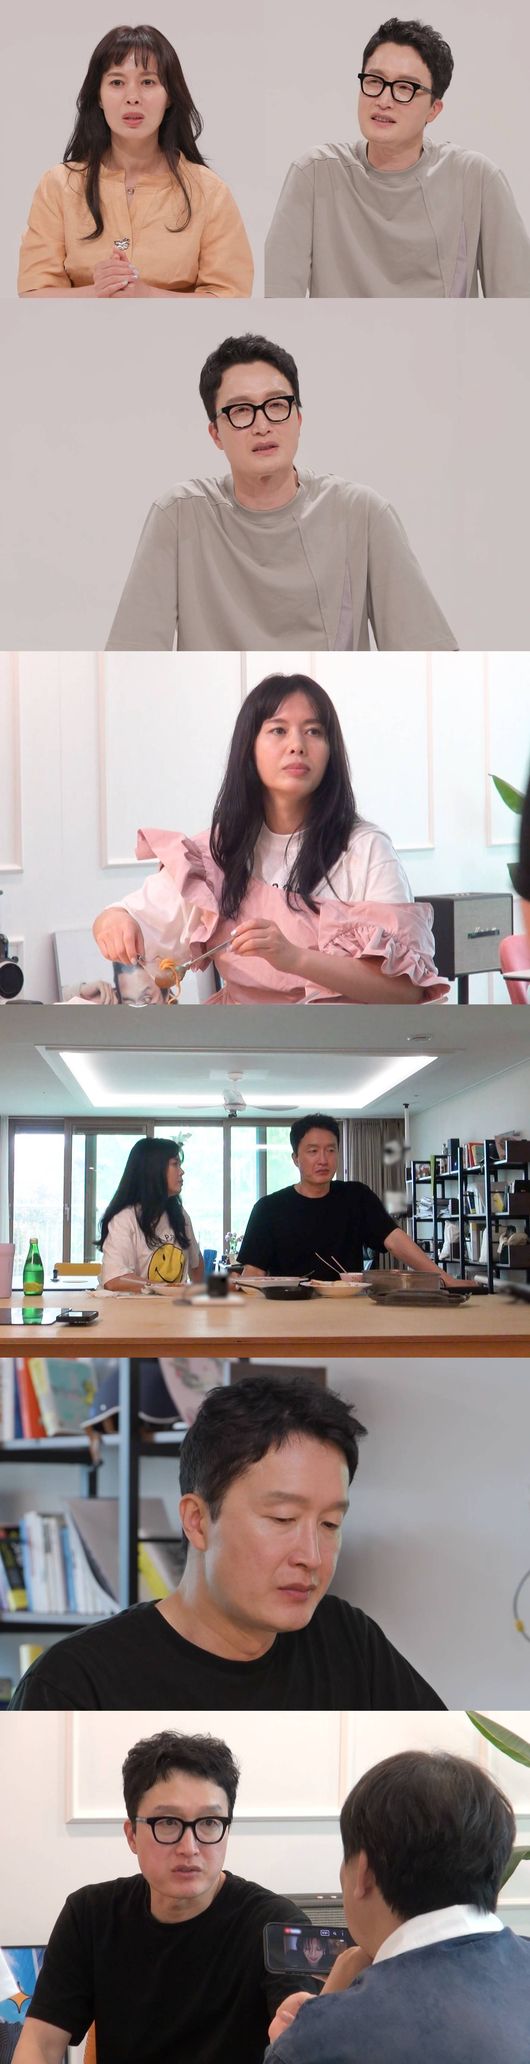 SBS Sangmyongmong Season 2 - You are my destiny ( ⁇   ⁇   ⁇   ⁇   ⁇   ⁇   ⁇   ⁇ ) is a picture of Choi Byung-mo and Lee Kyu-ins daily life,On the 12th, the actress Choi Byung-mos Wife Lee Kyu-in, who collected the topic with her unique character, reveals her personal life hidden in Husband.Husband It is said that Choi Byung-mo did not really know that he was doing it outside of  ⁇   ⁇  and Flagship in Lee Gyu-ins extraordinary behavior after going out secretly.Lee Ji-hye, who watched together in the studio, also wondered that he thought he was watching Taeri. He wondered what the secret of Personal Life would be.After returning home, Lee Kyu-in tried to cook for Husband Choi Byung-mo. Lee Kyu-in, who rarely lives, faced difficulties from the beginning of cooking.At the end of the twists and turns, Choi Byung-mo was not able to eat at the end of Wifes cooking, refusing to eat, and even unexpected behavior.In the studio, Choi Byung-mo was too much, and the cause exploded, and Wife Lee Gyu-in was also the first to have a cold and hard look, and there was a strange tension between the couple.Provided by SBS